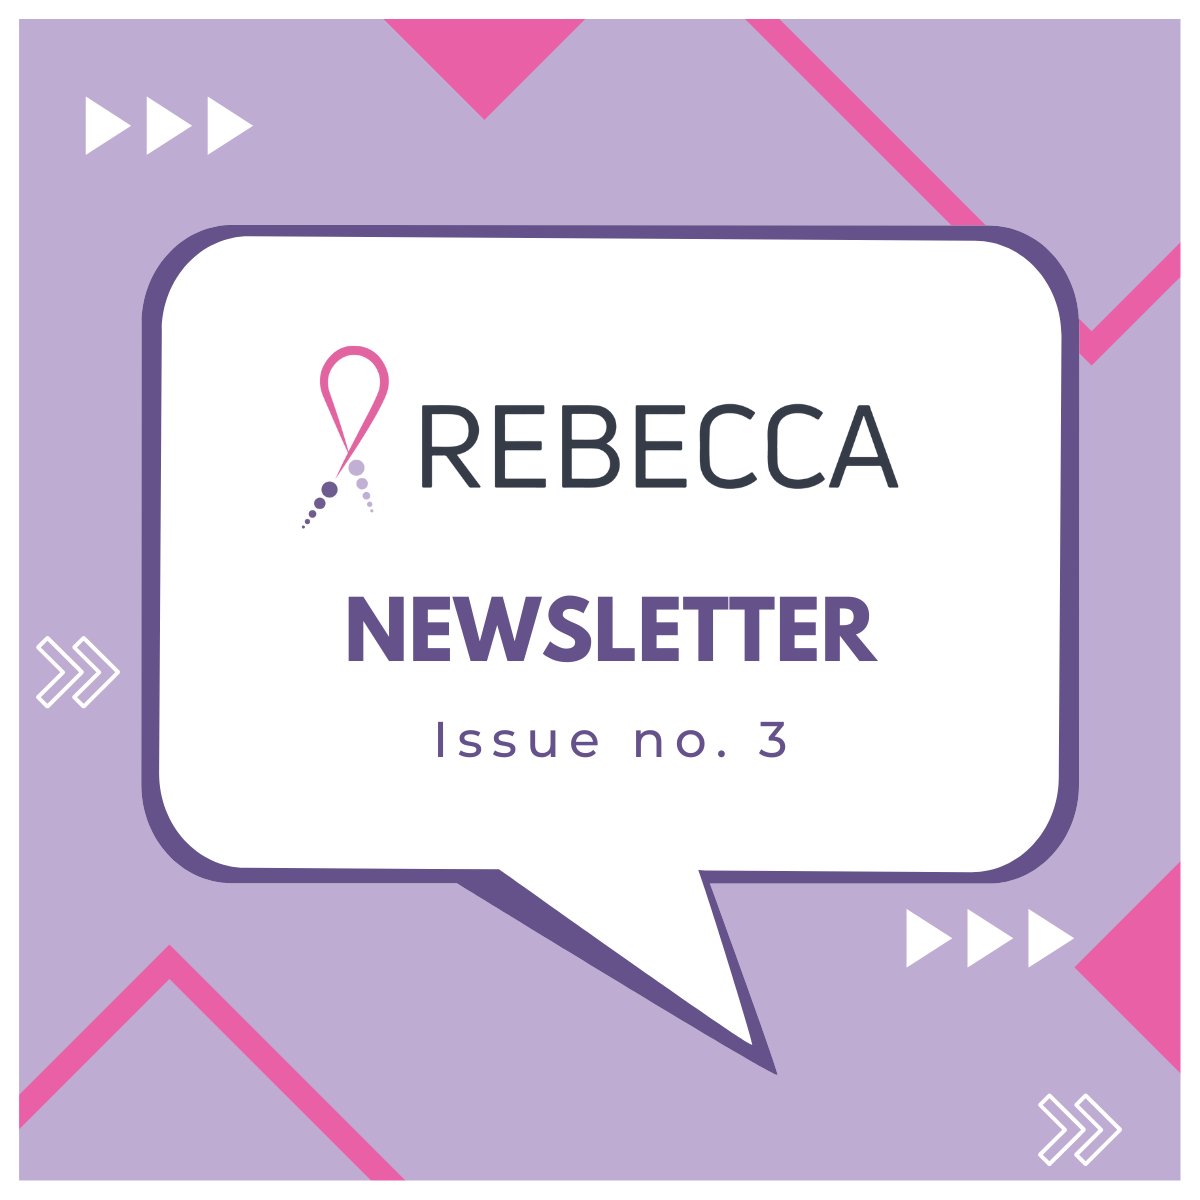 The third edition of our newsletter is out! You can read it here 👉 mailchi.mp/6bf01498fe59/r…

Don't miss out on future updates. Subscribe 👉rebeccaproject.us6.list-manage.com/subscribe?u=17…

#BreastCancer #BreastCancerSupport #eufunded #research #horizon2020